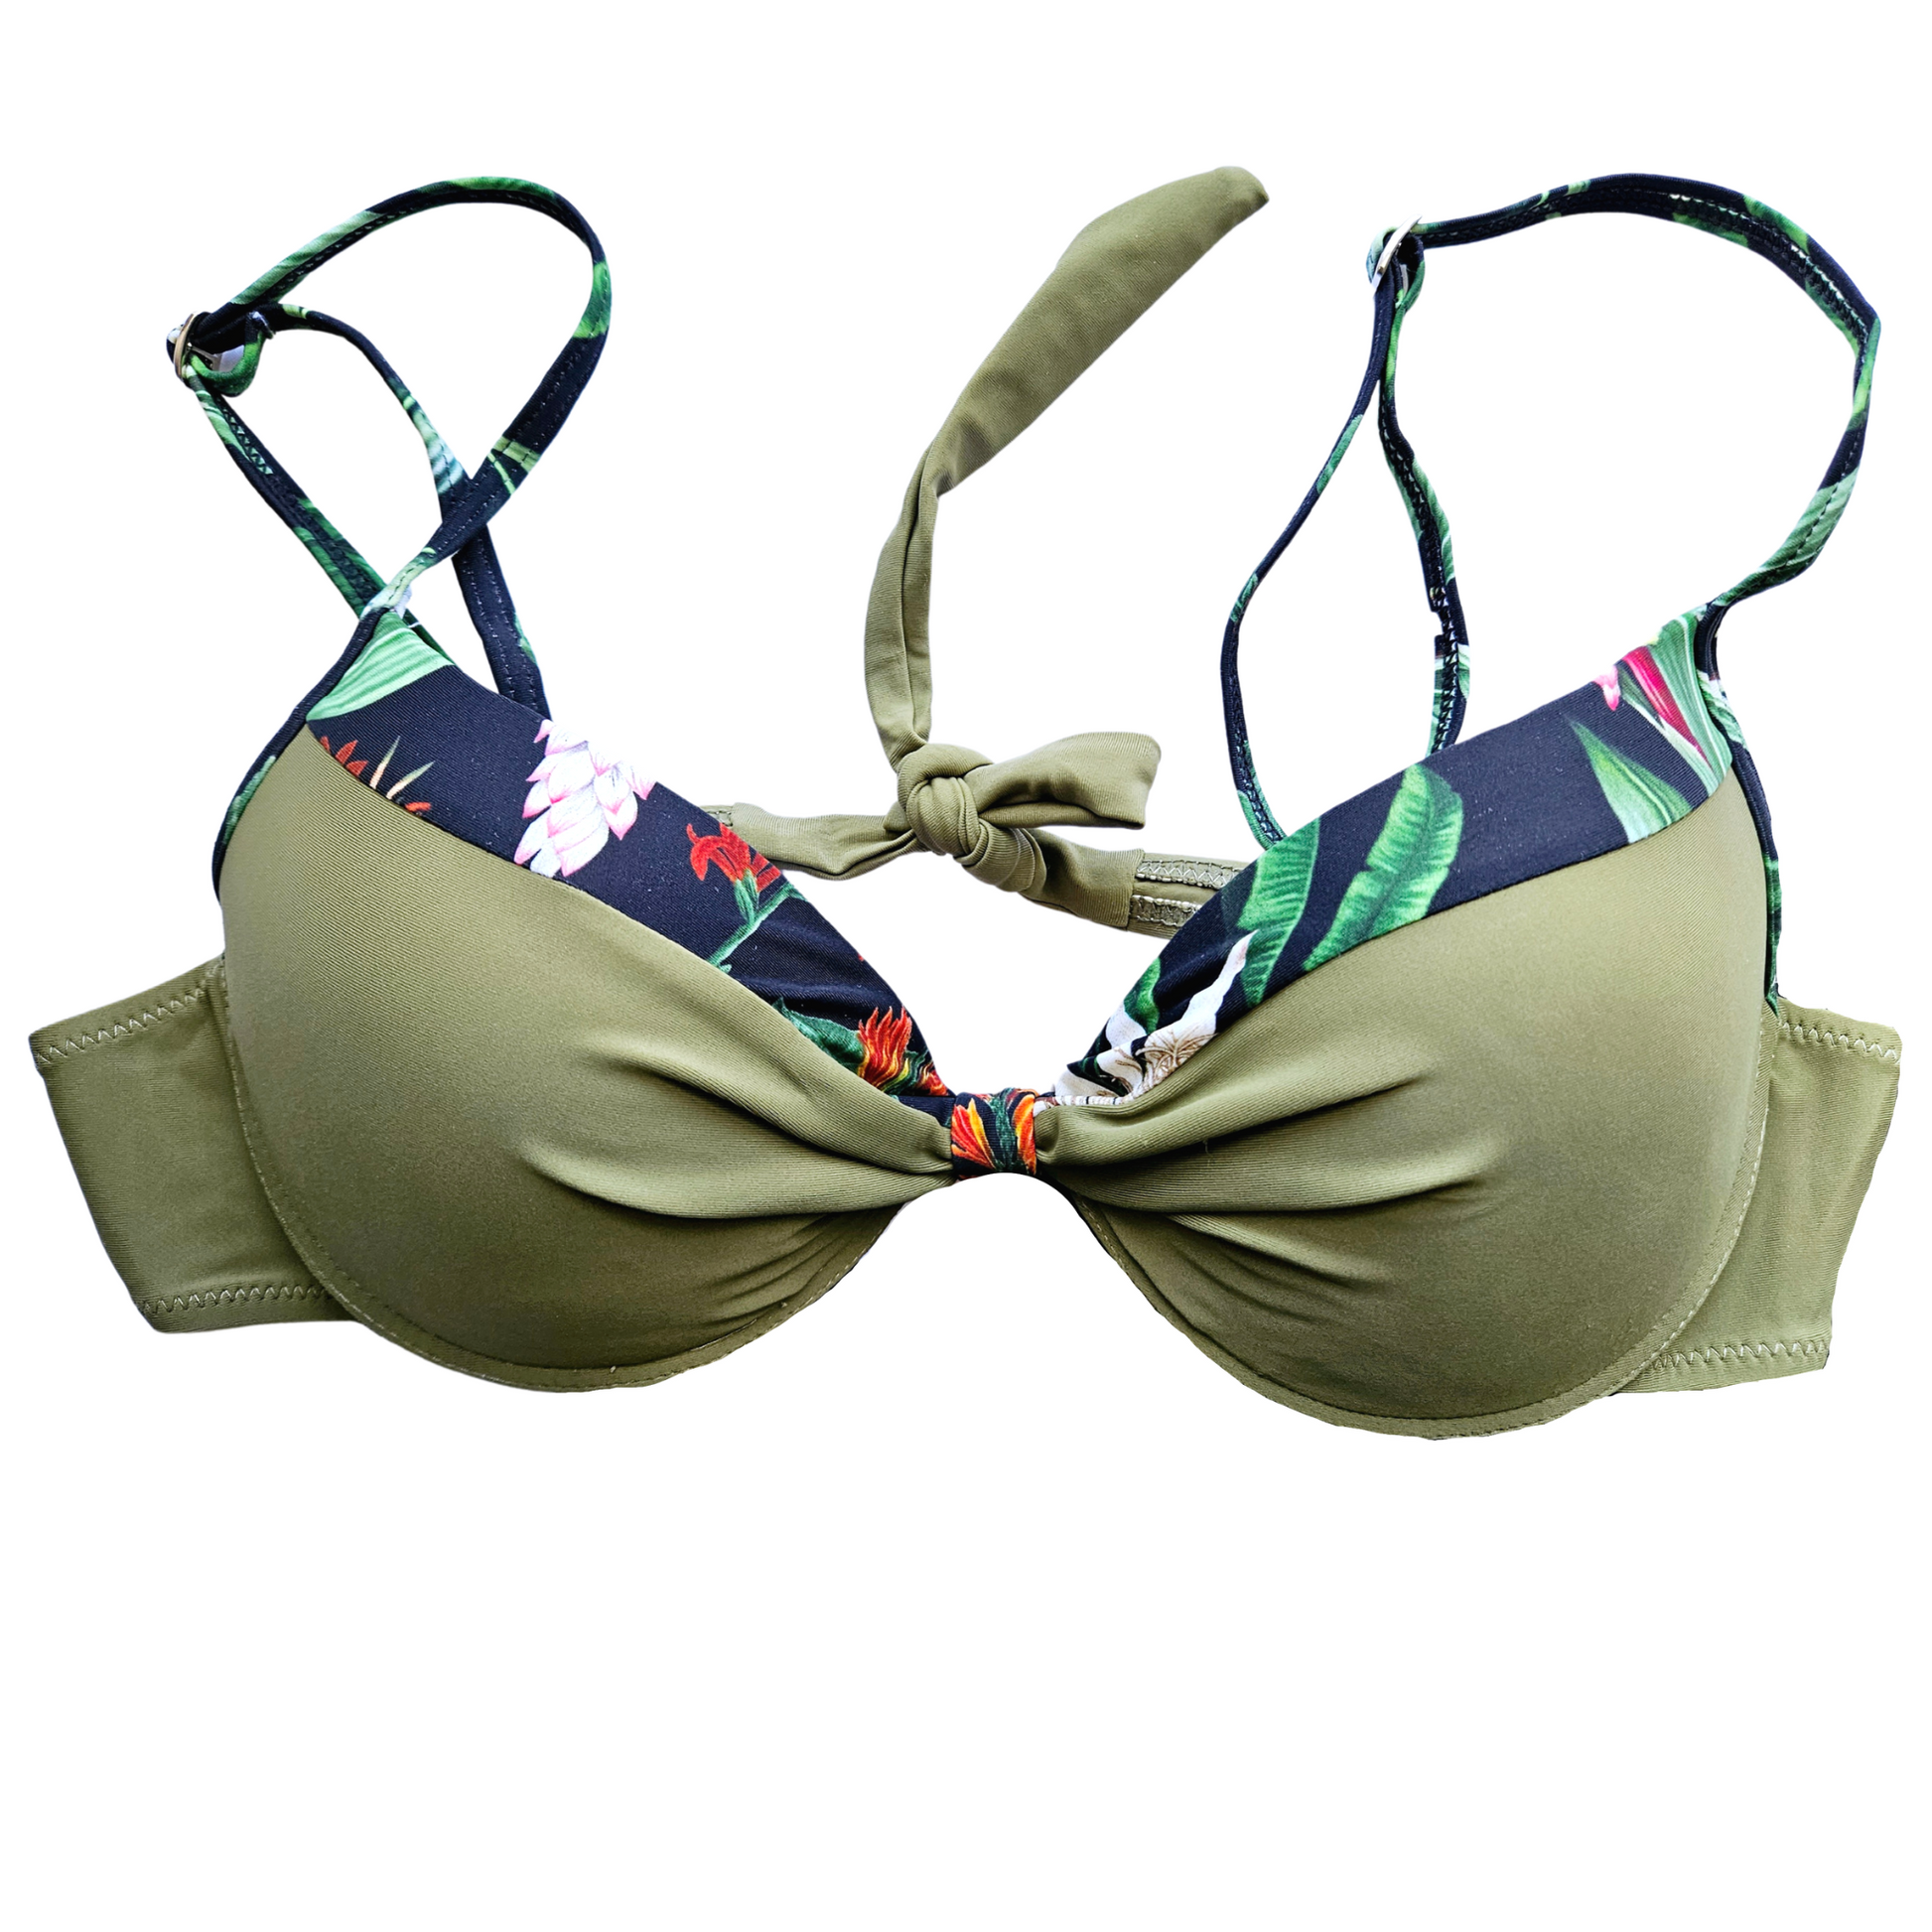 Stylish dark green bikini with a floral design on the top and a thong bottom"